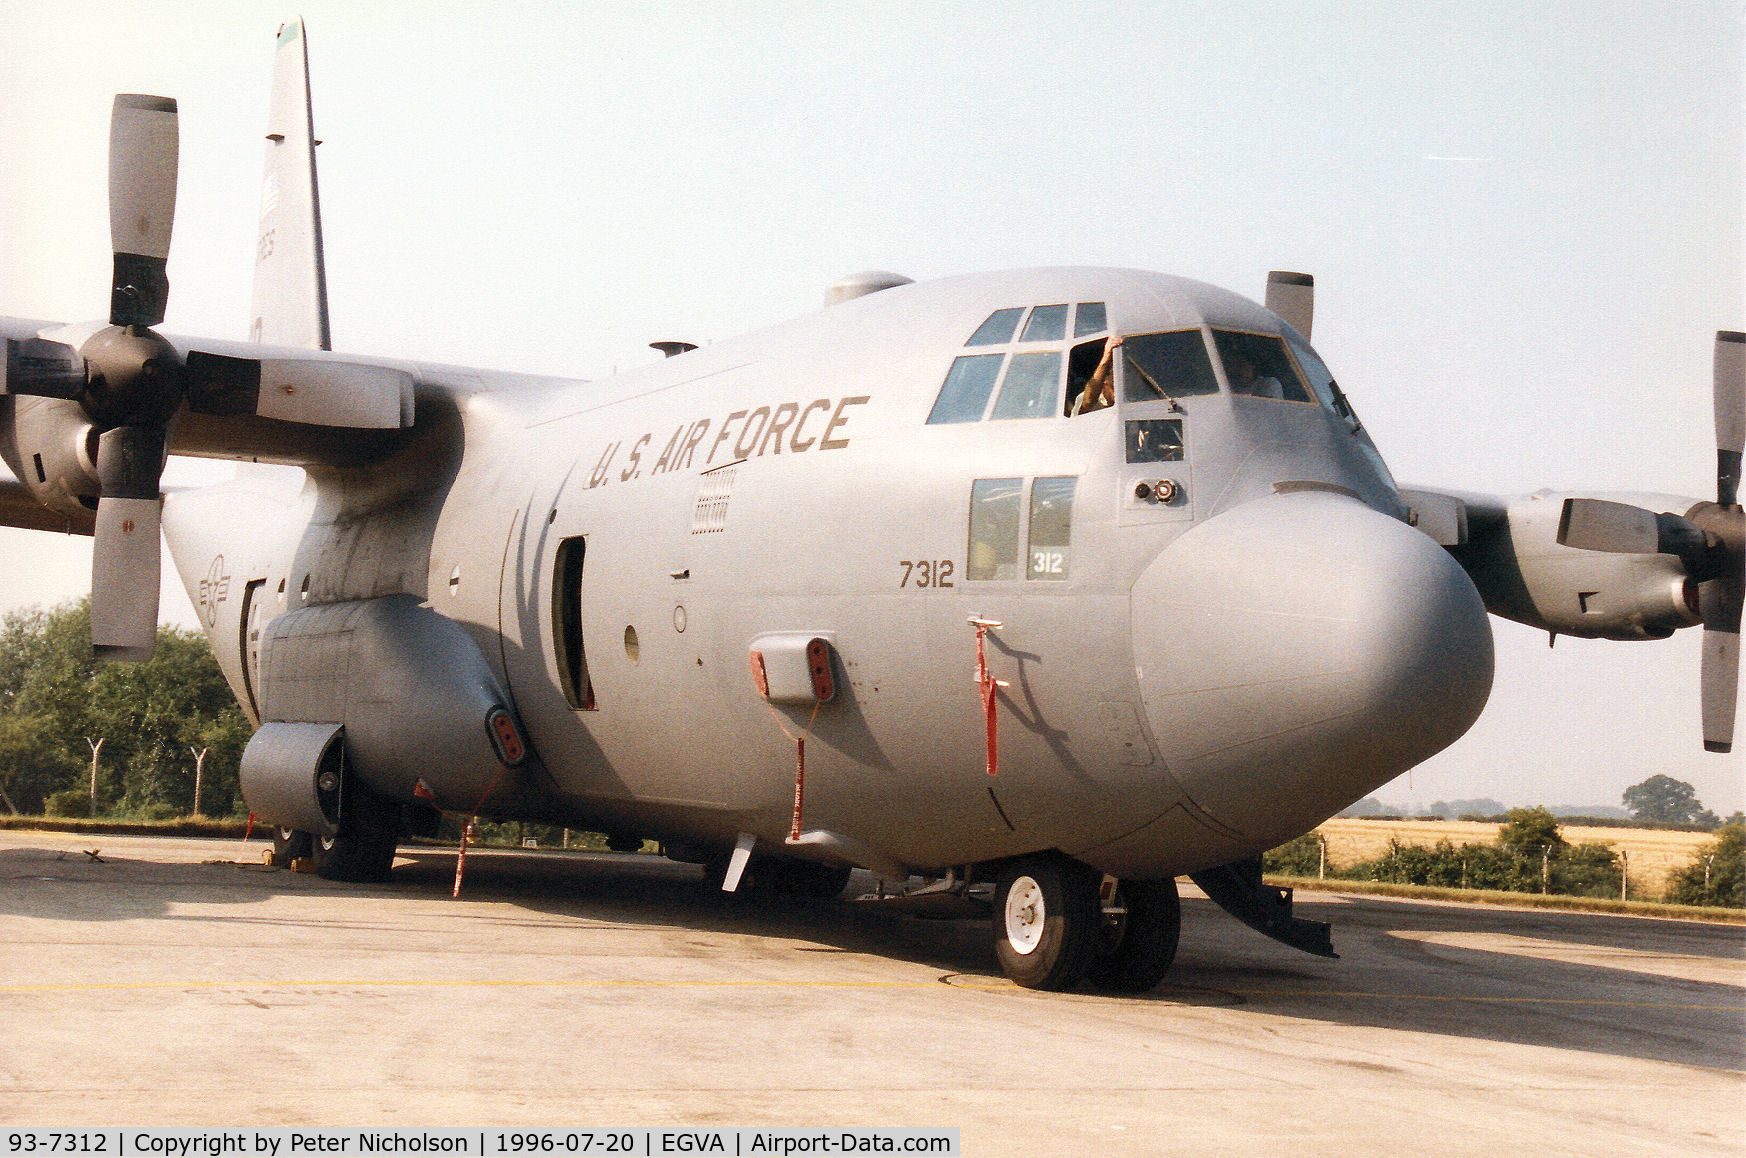 93-7312, 1993 Lockheed C-130H Hercules C/N 382-5377, C-130H Hercules named Spirit of Sumit 38 of the 731st Airlift Squadron/302nd Airlift Wing at Peterson AFB on display at the 1996 Royal Intnl Air Tattoo at RAF Fairford.